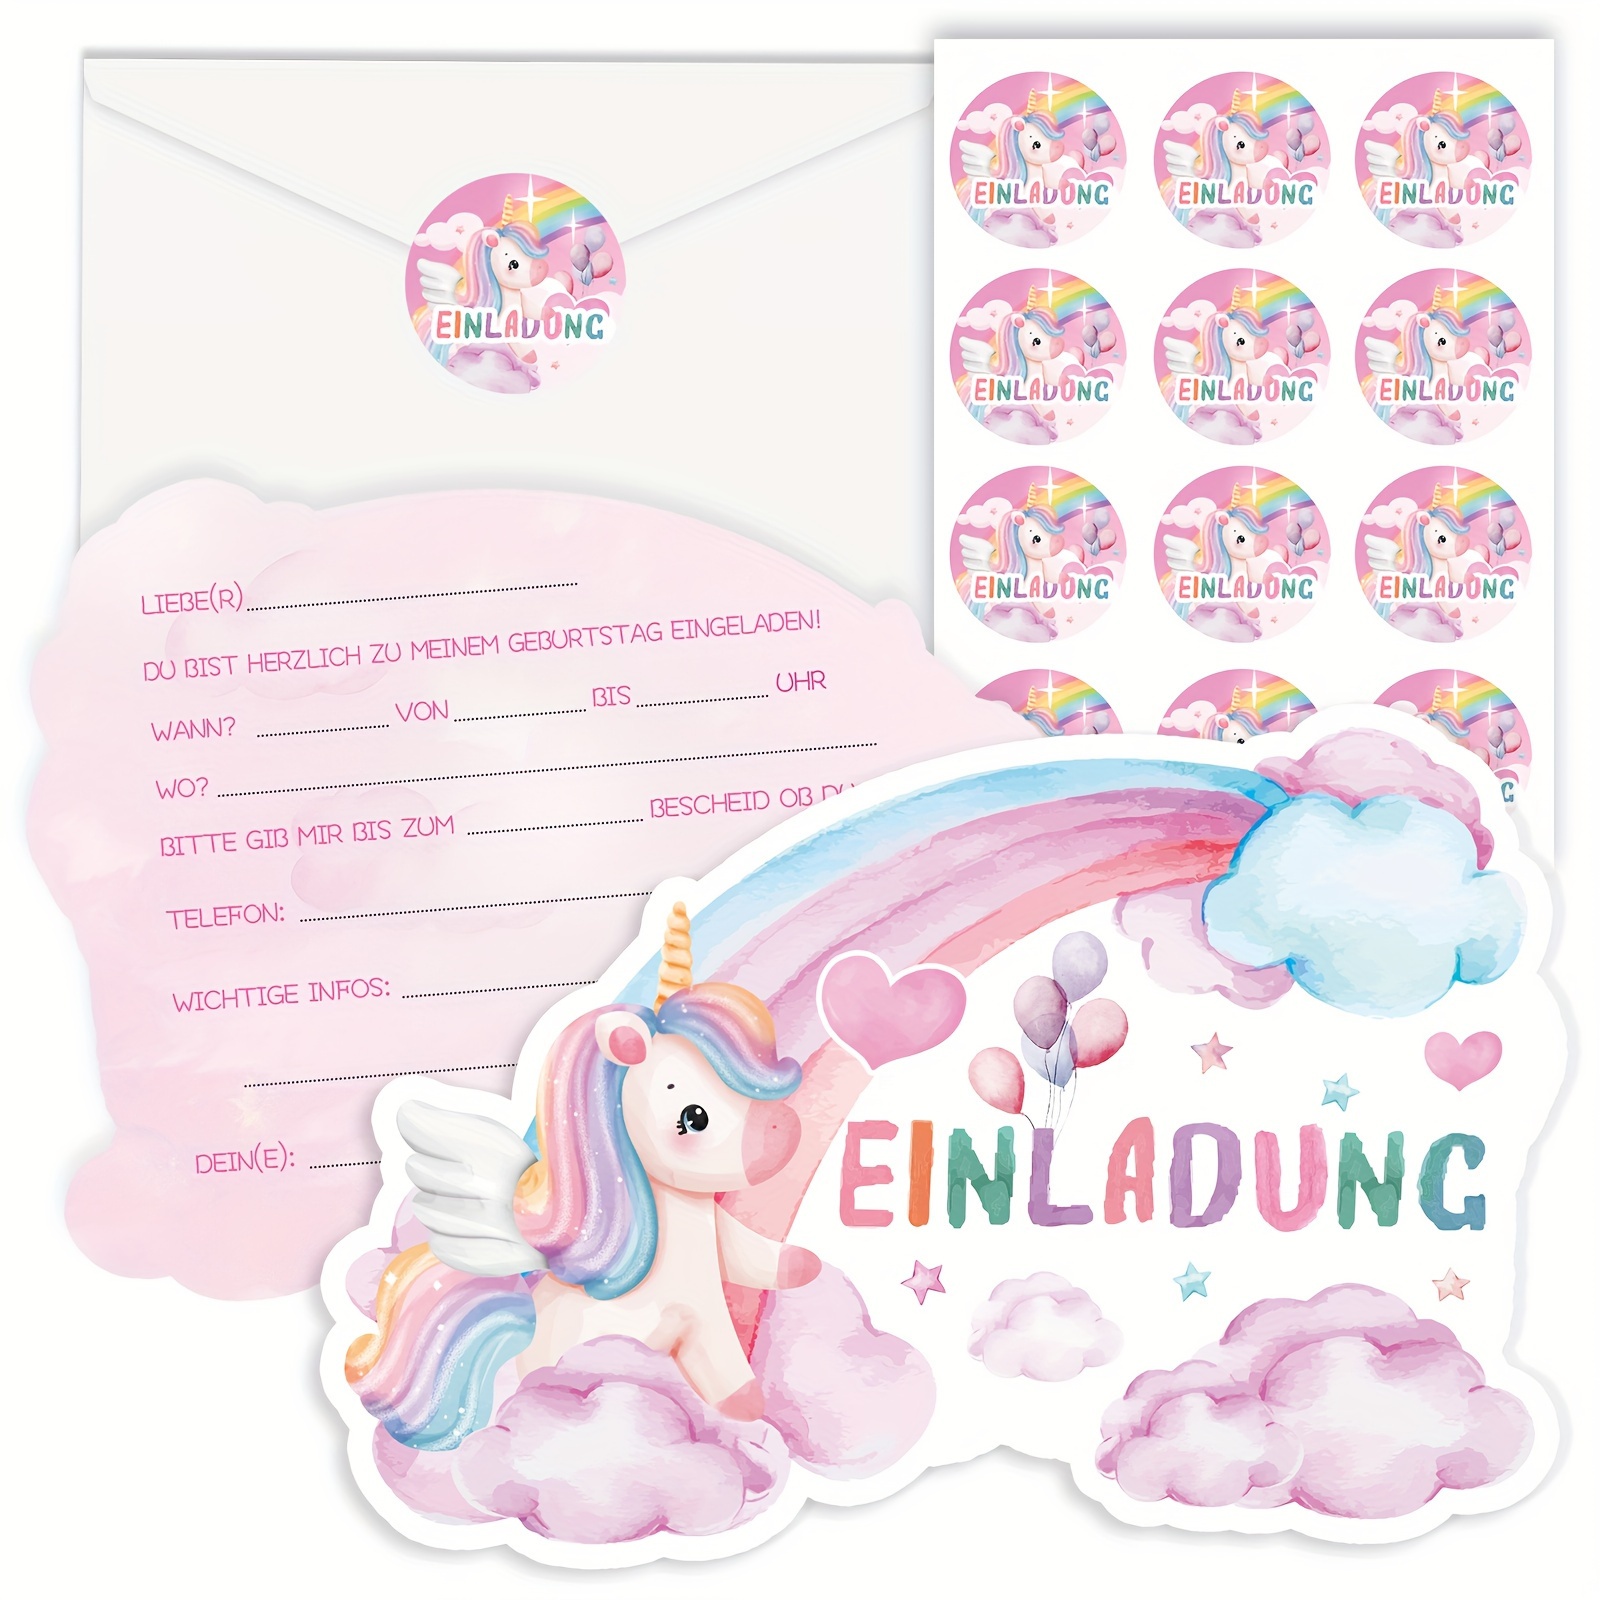 

12pcs German Unicorn Birthday Invitation Card With 12 Envelopes, 12 Unicorn Stickers, Birthday Gifts, Theme Parties, Holiday Parties, Invitations Greeting Cards Invitations Invitation To Good Friends